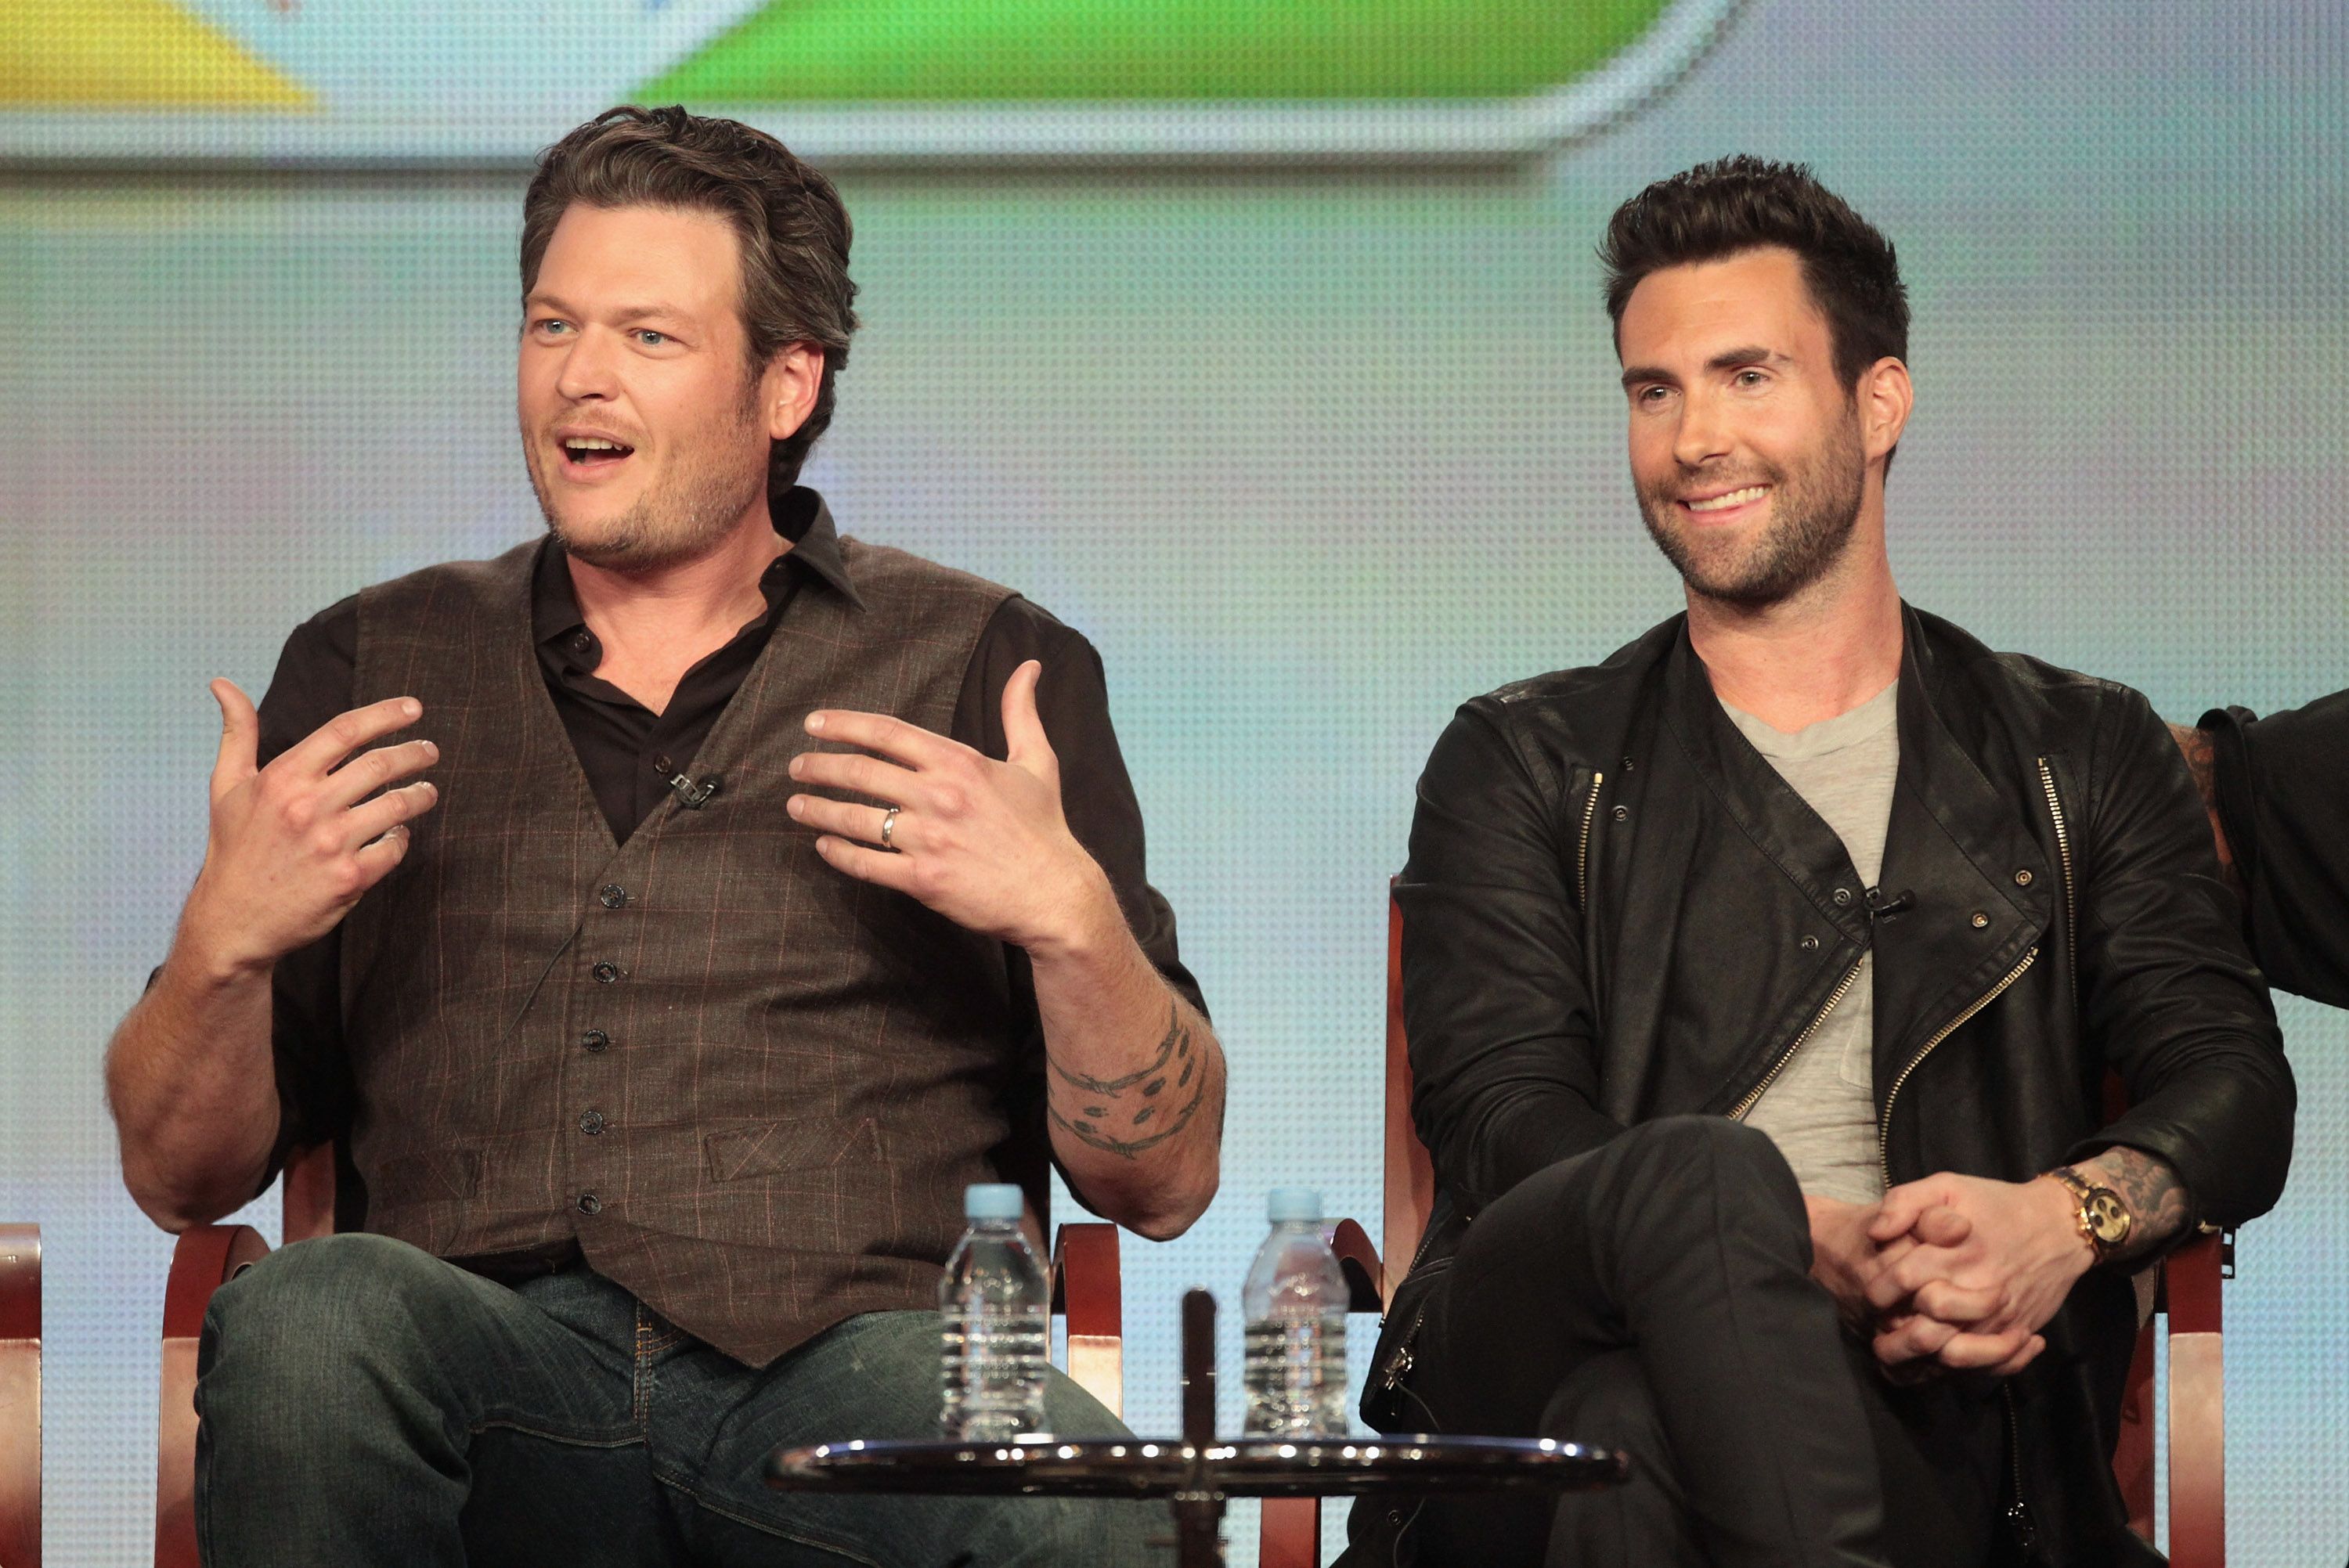 Blake Shelton and Adam Levine  during a "The Voice" panel discussion in 2012 | Source: Getty Images